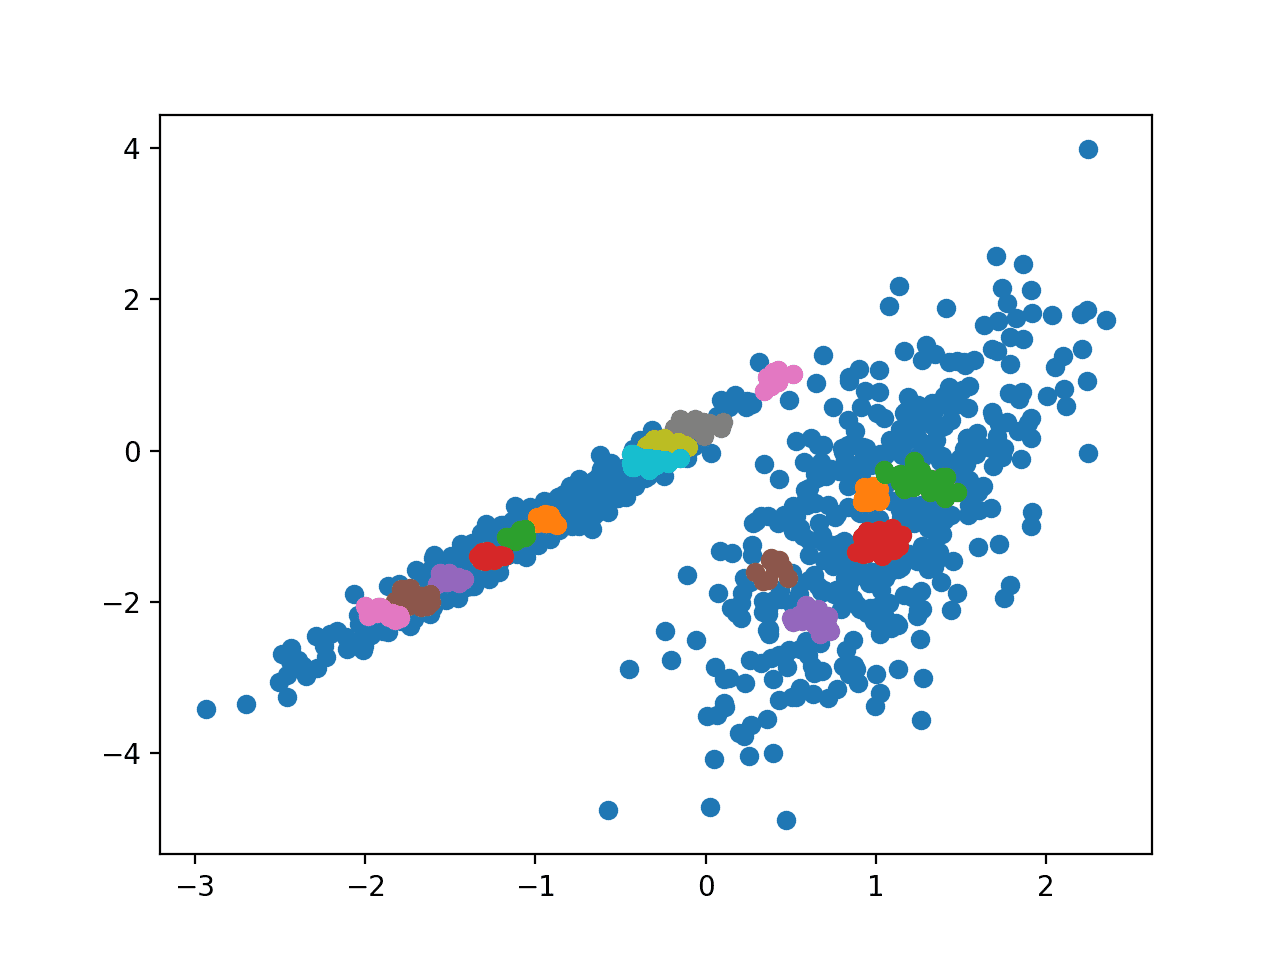 Scatter Plot of Dataset With Clusters Identified Using OPTICS Clustering